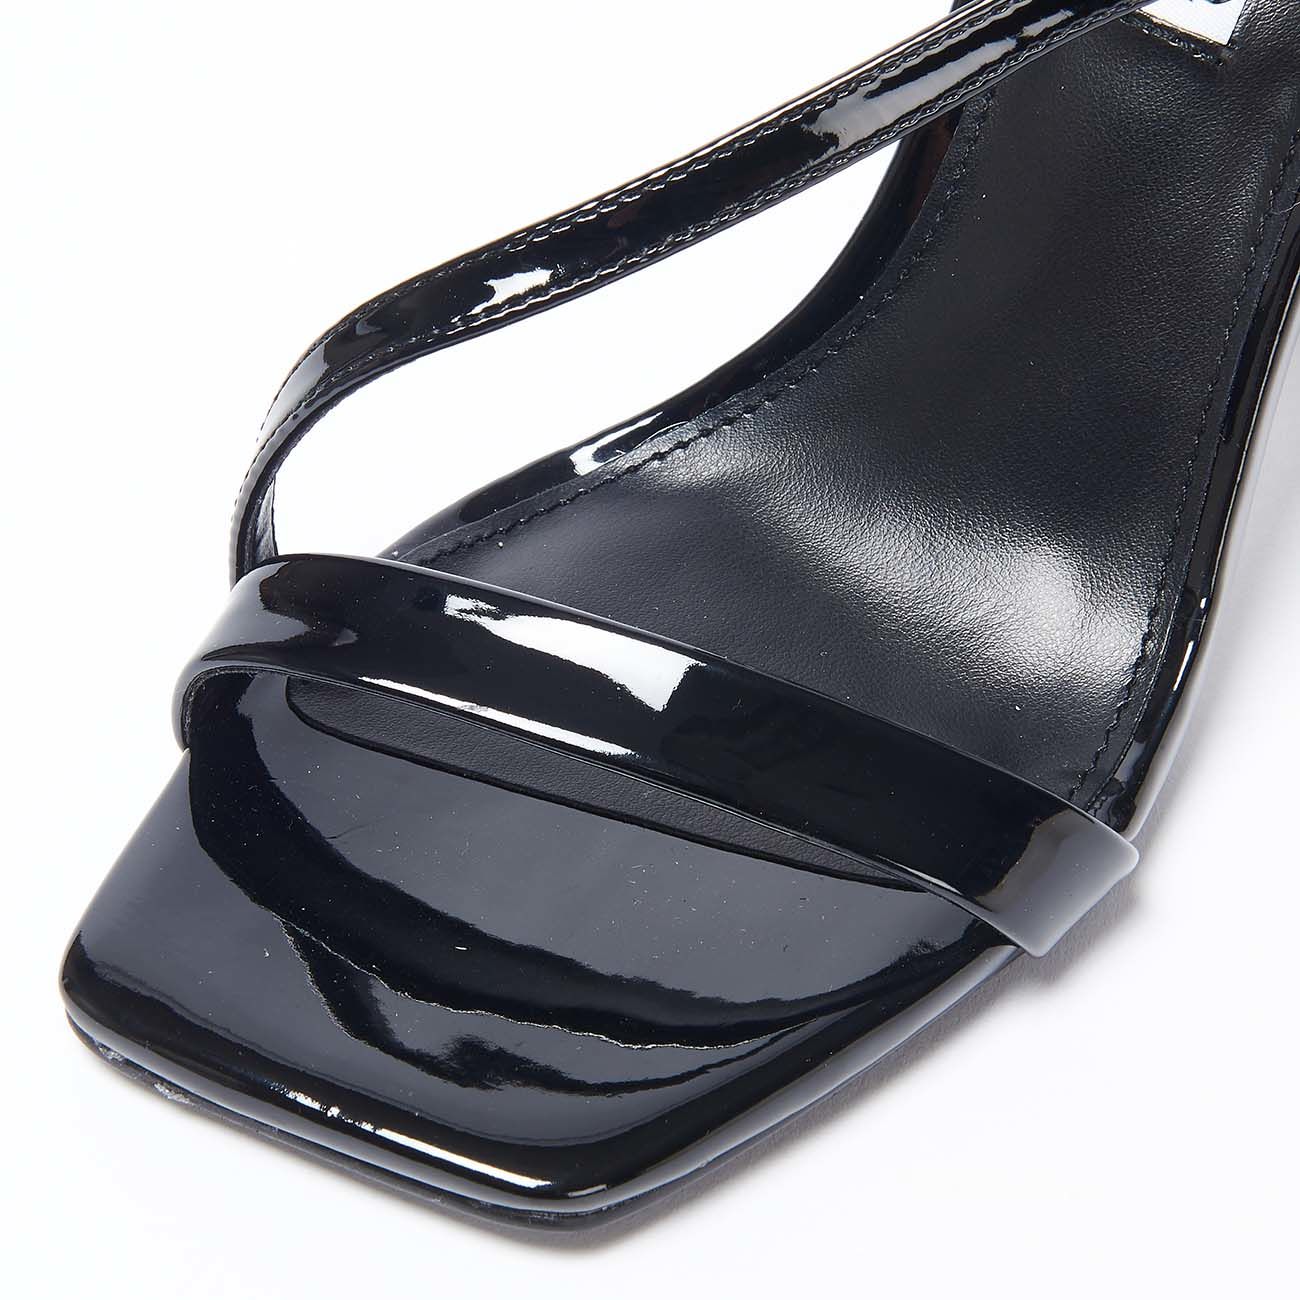 STEVE MADDEN JAYNELL PATENT LEATHER HEEL SANDALS Woman Black patent